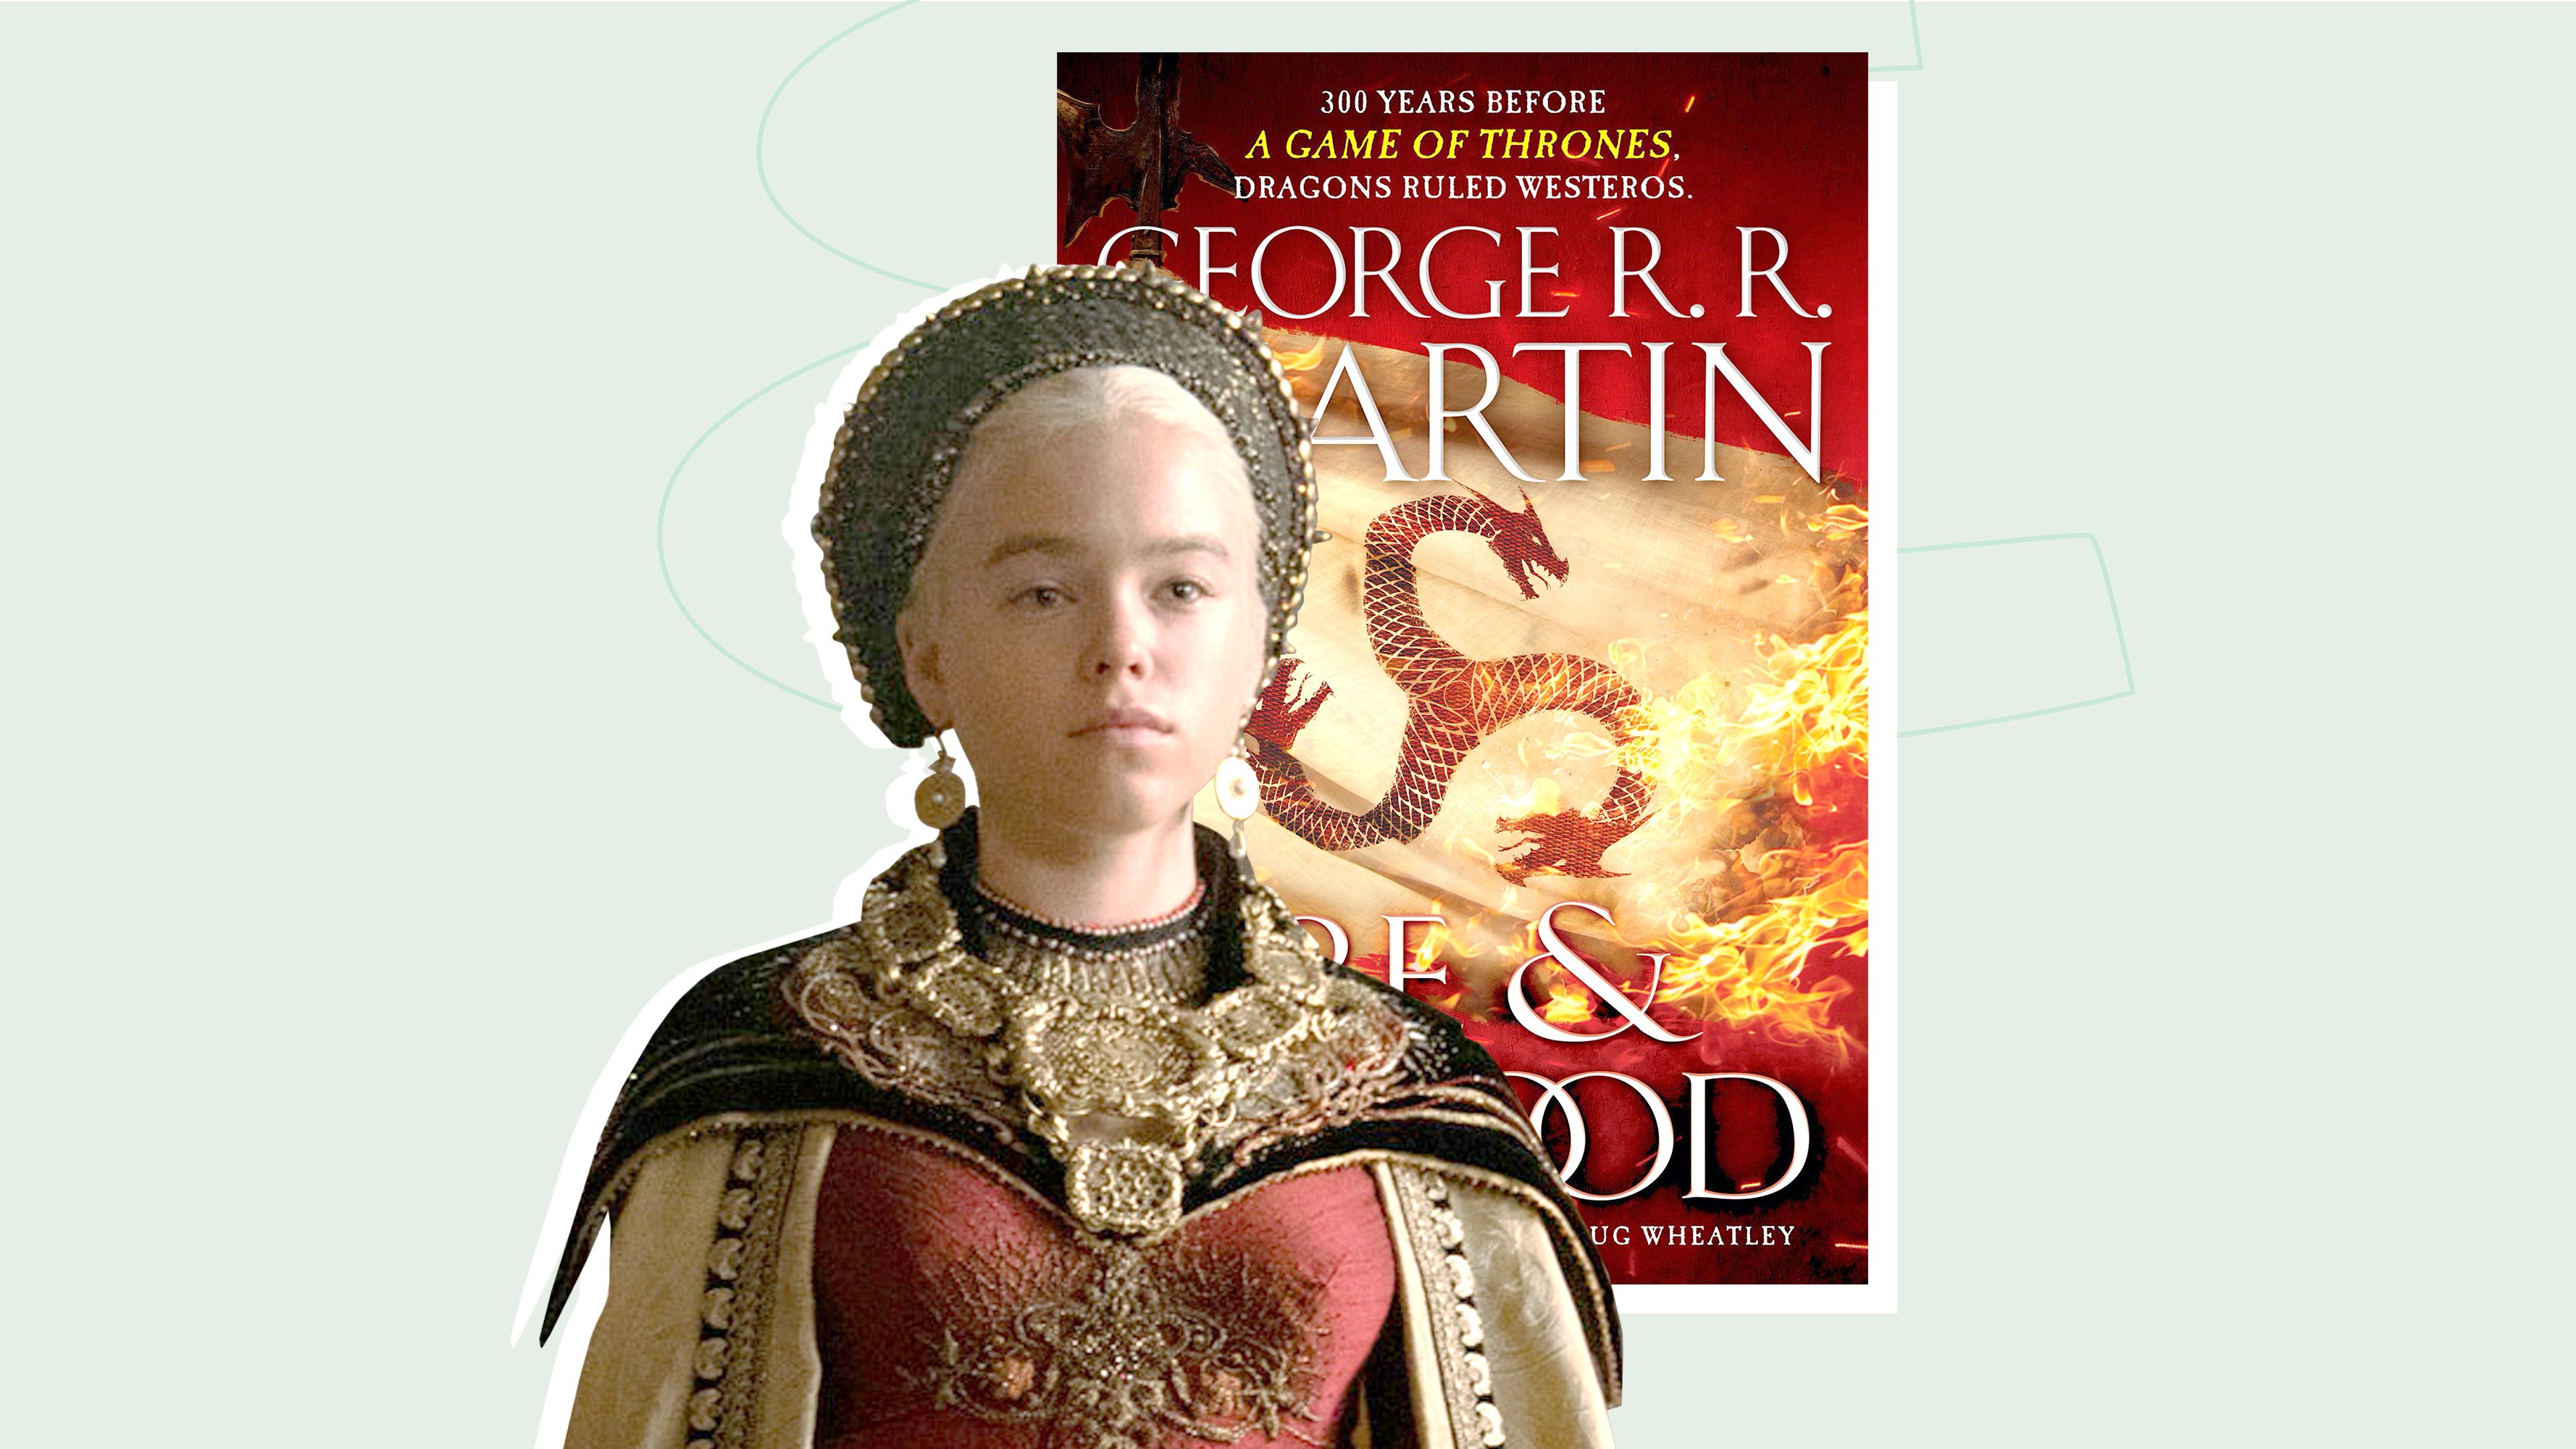 Changes from 'Fire and Blood' in 'House of the Dragon' we loved